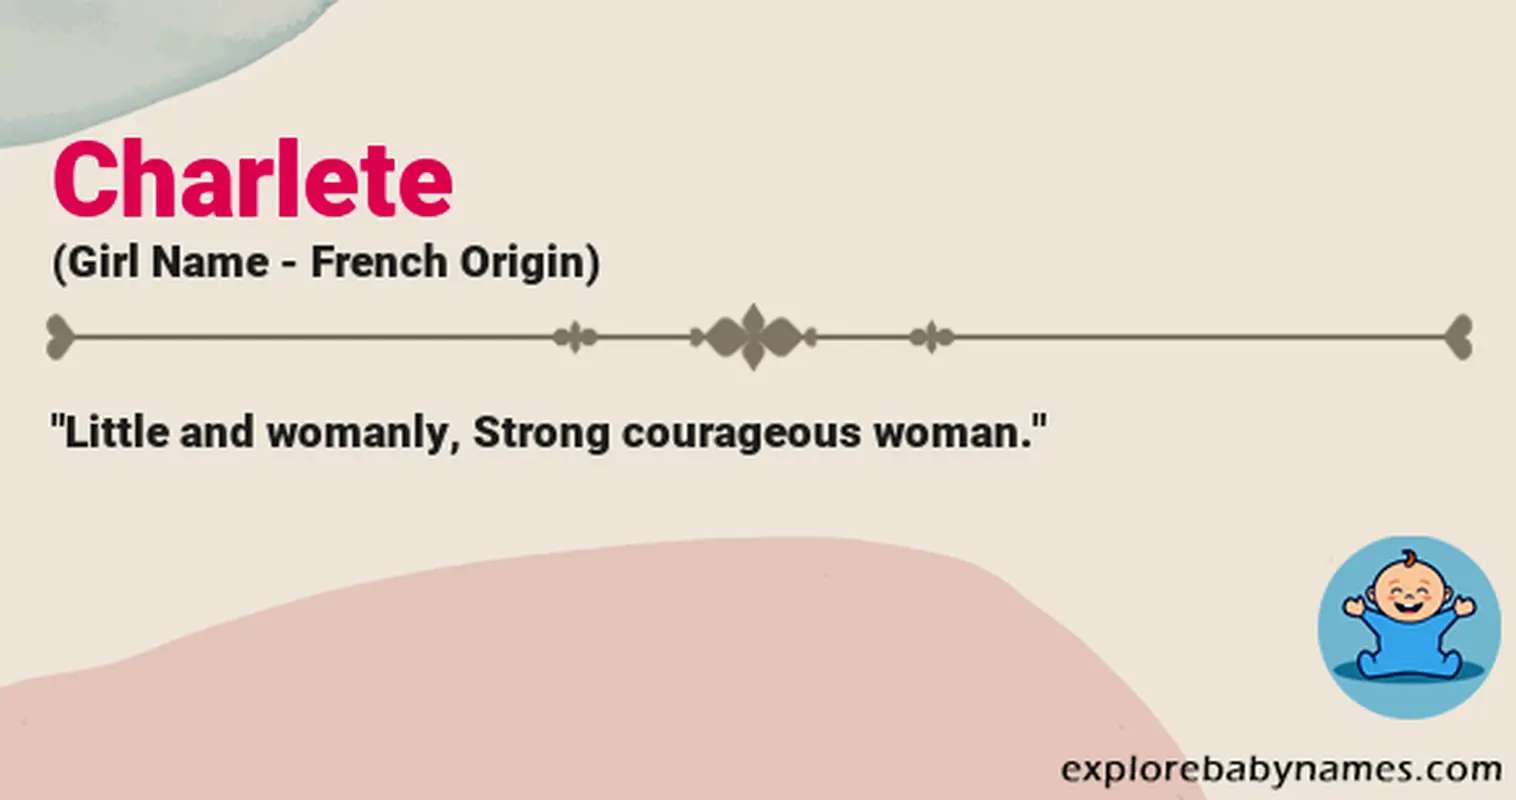 Meaning of Charlete